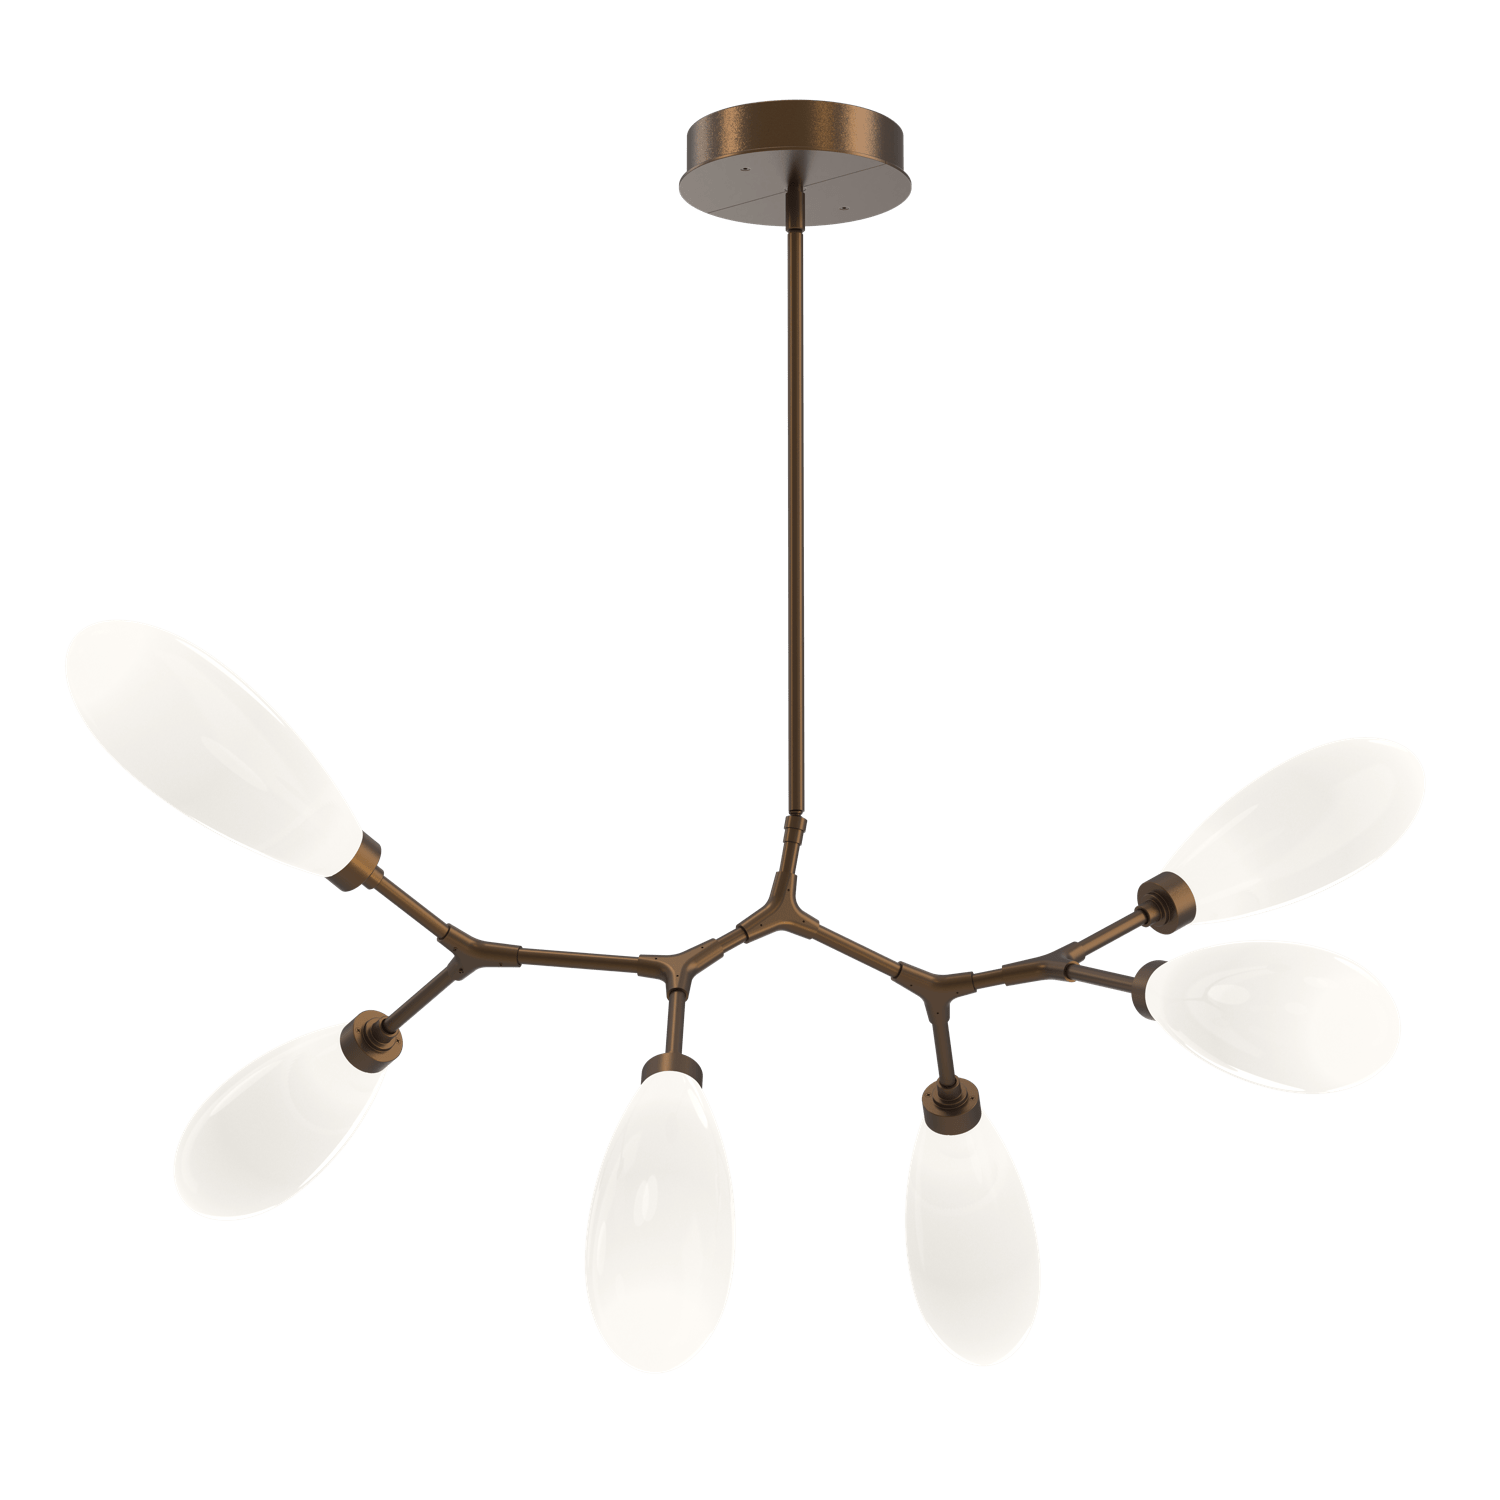 PLB0071-BA-FB-WL-LL-Hammerton-Studio-Fiori-6-light-organic-branch-chandelier-with-flat-bronze-finish-and-opal-white-glass-shades-and-LED-lamping